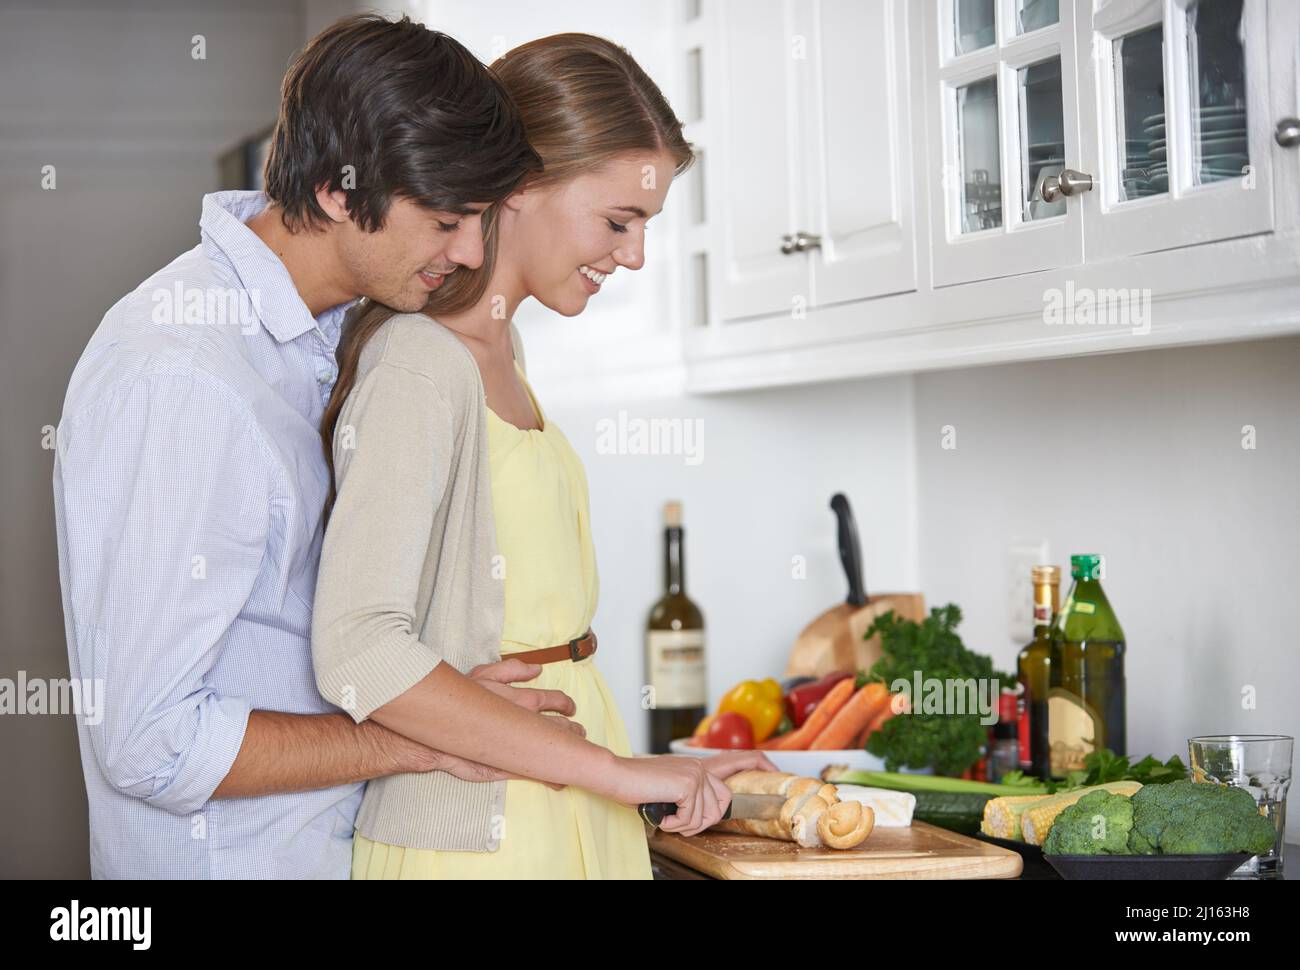 Making dinner lovingly. Shot of a young couple in their kitchen preparing dinner together. Stock Photo